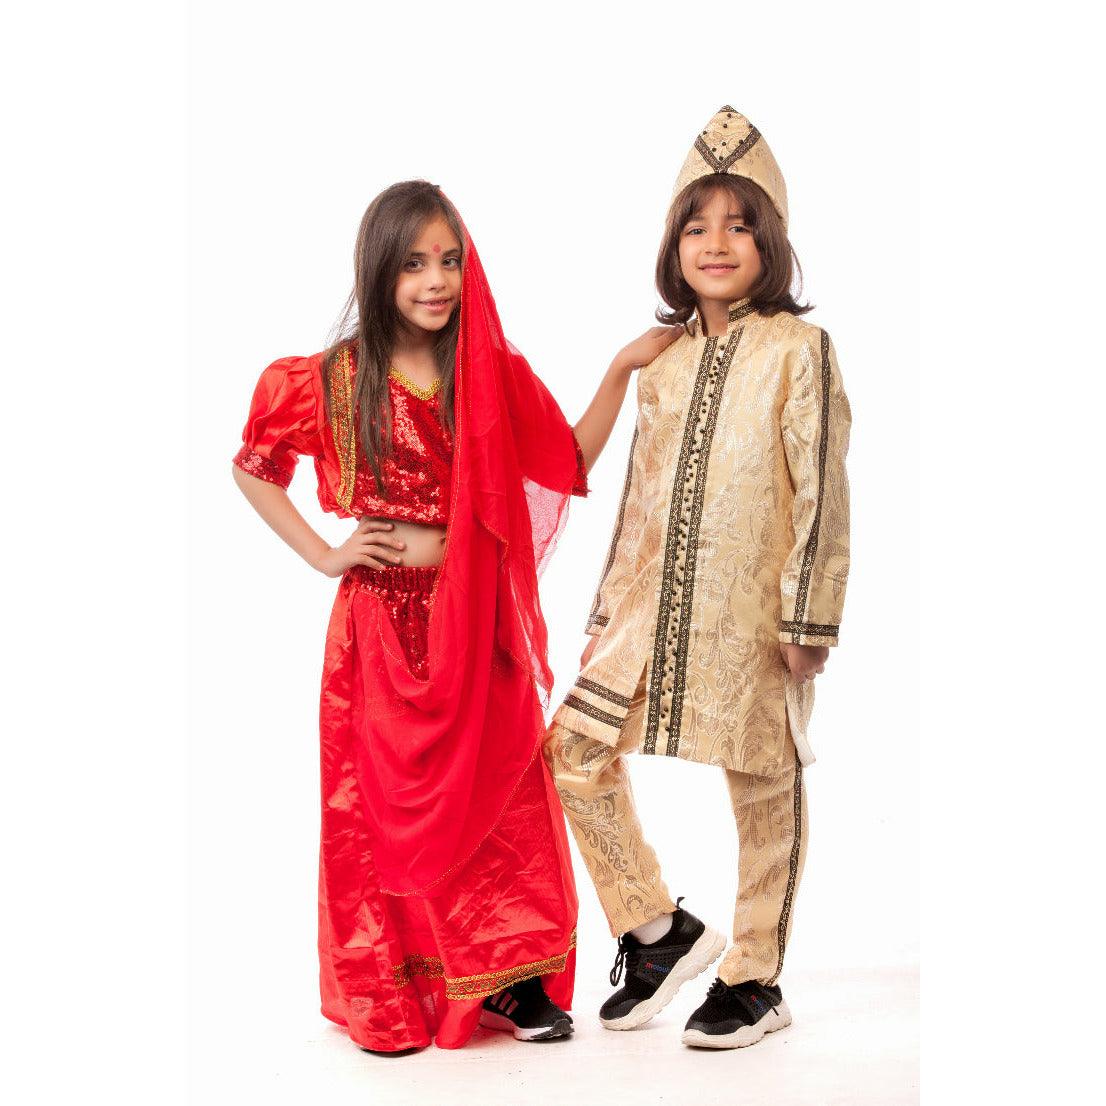 Indian Girl Costume - Ourkids - M&A